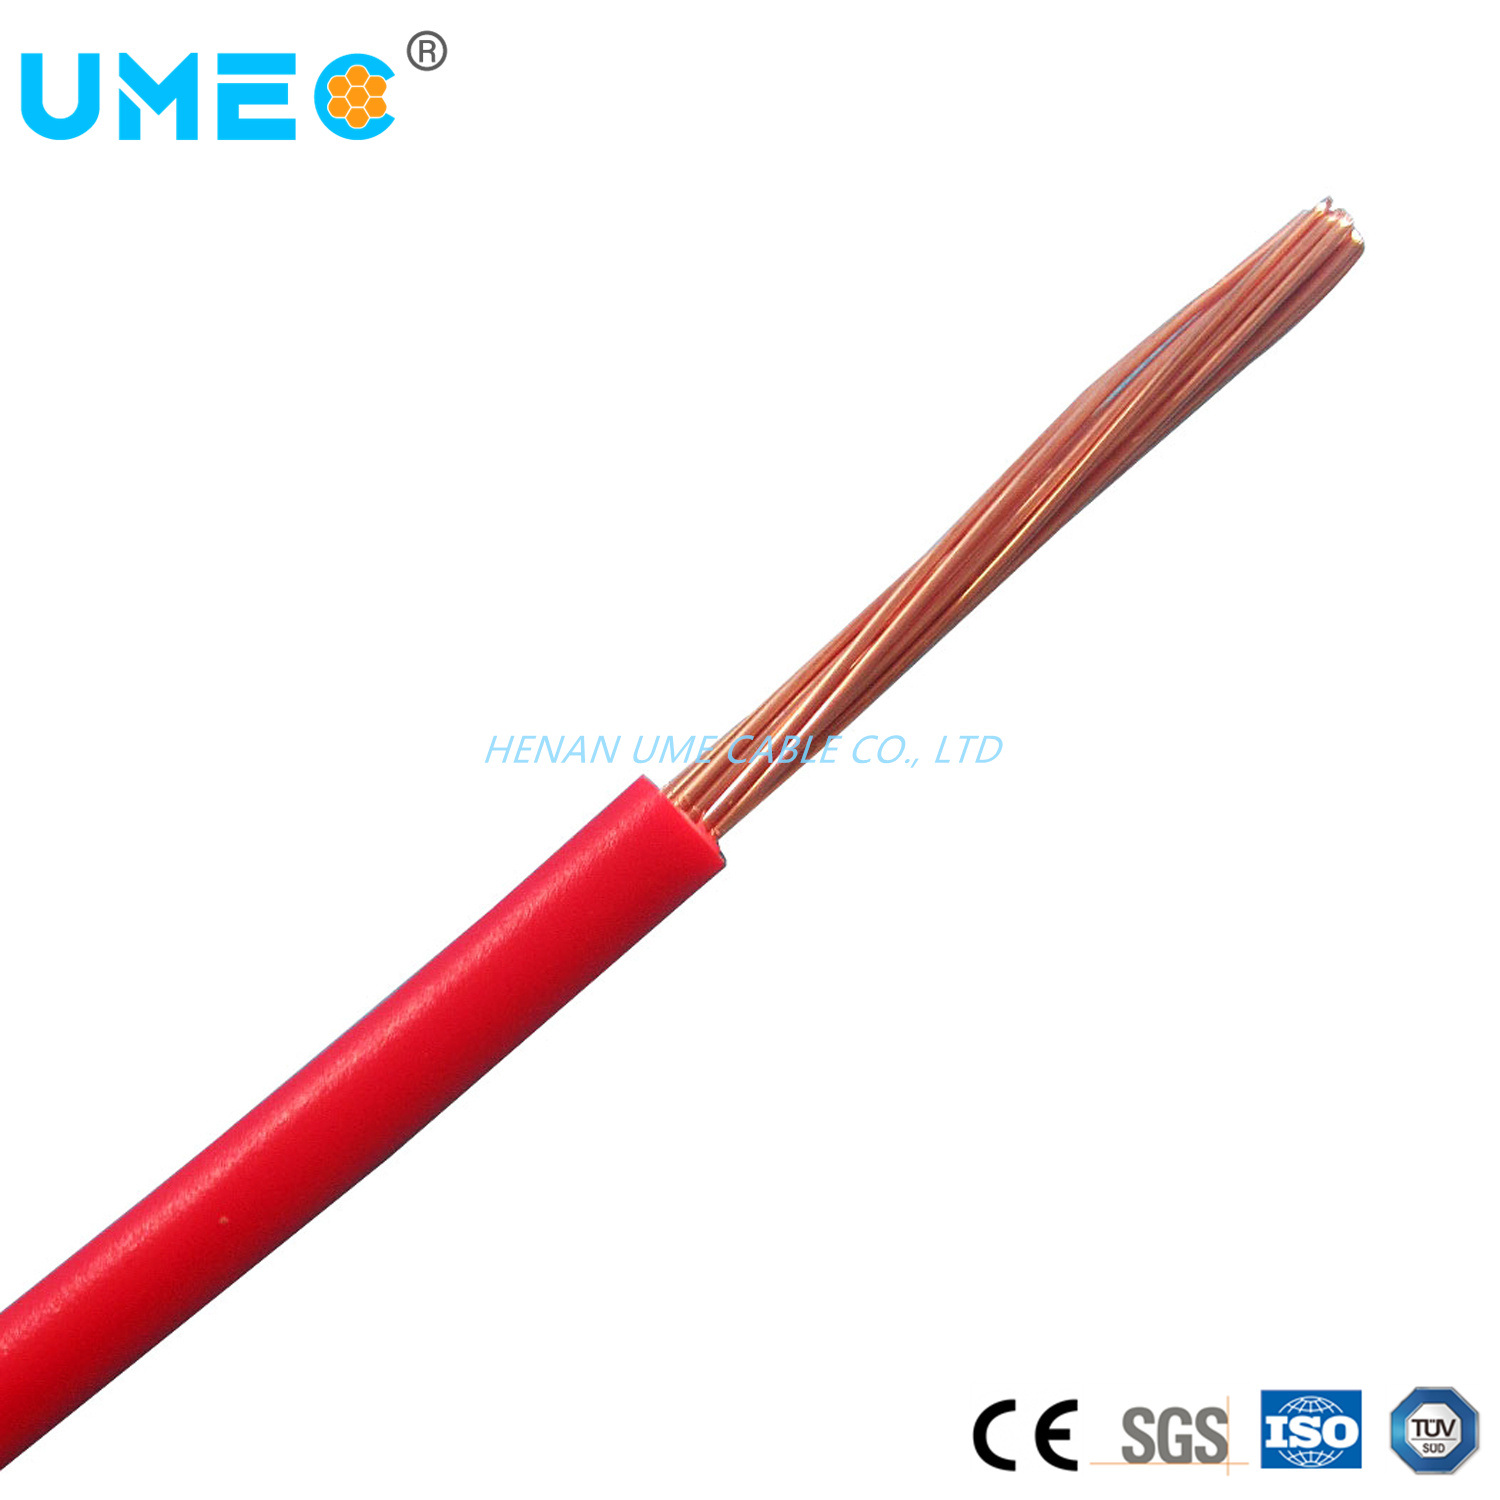 
                Wholesale Price 1.5mm² 2.5mm² 4mm² 6mm² 10mm² 16mm² Size Electrical Wire Cable for Home Specifications Electrical Cable
            